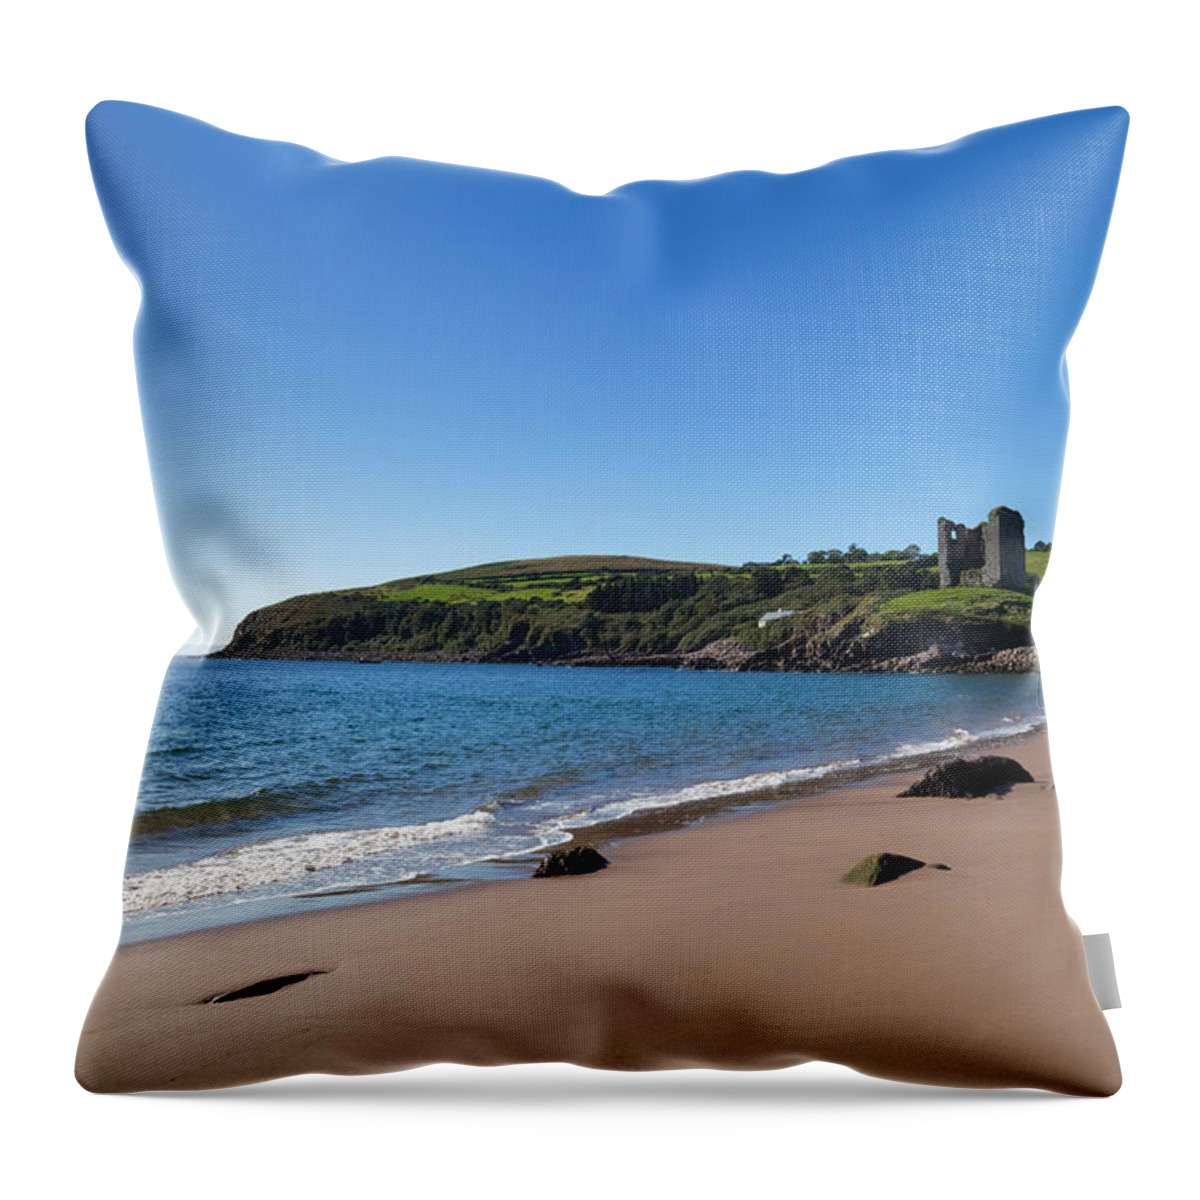 Photography Throw Pillow featuring the photograph Ruined 16th Century Minard Castle by Panoramic Images